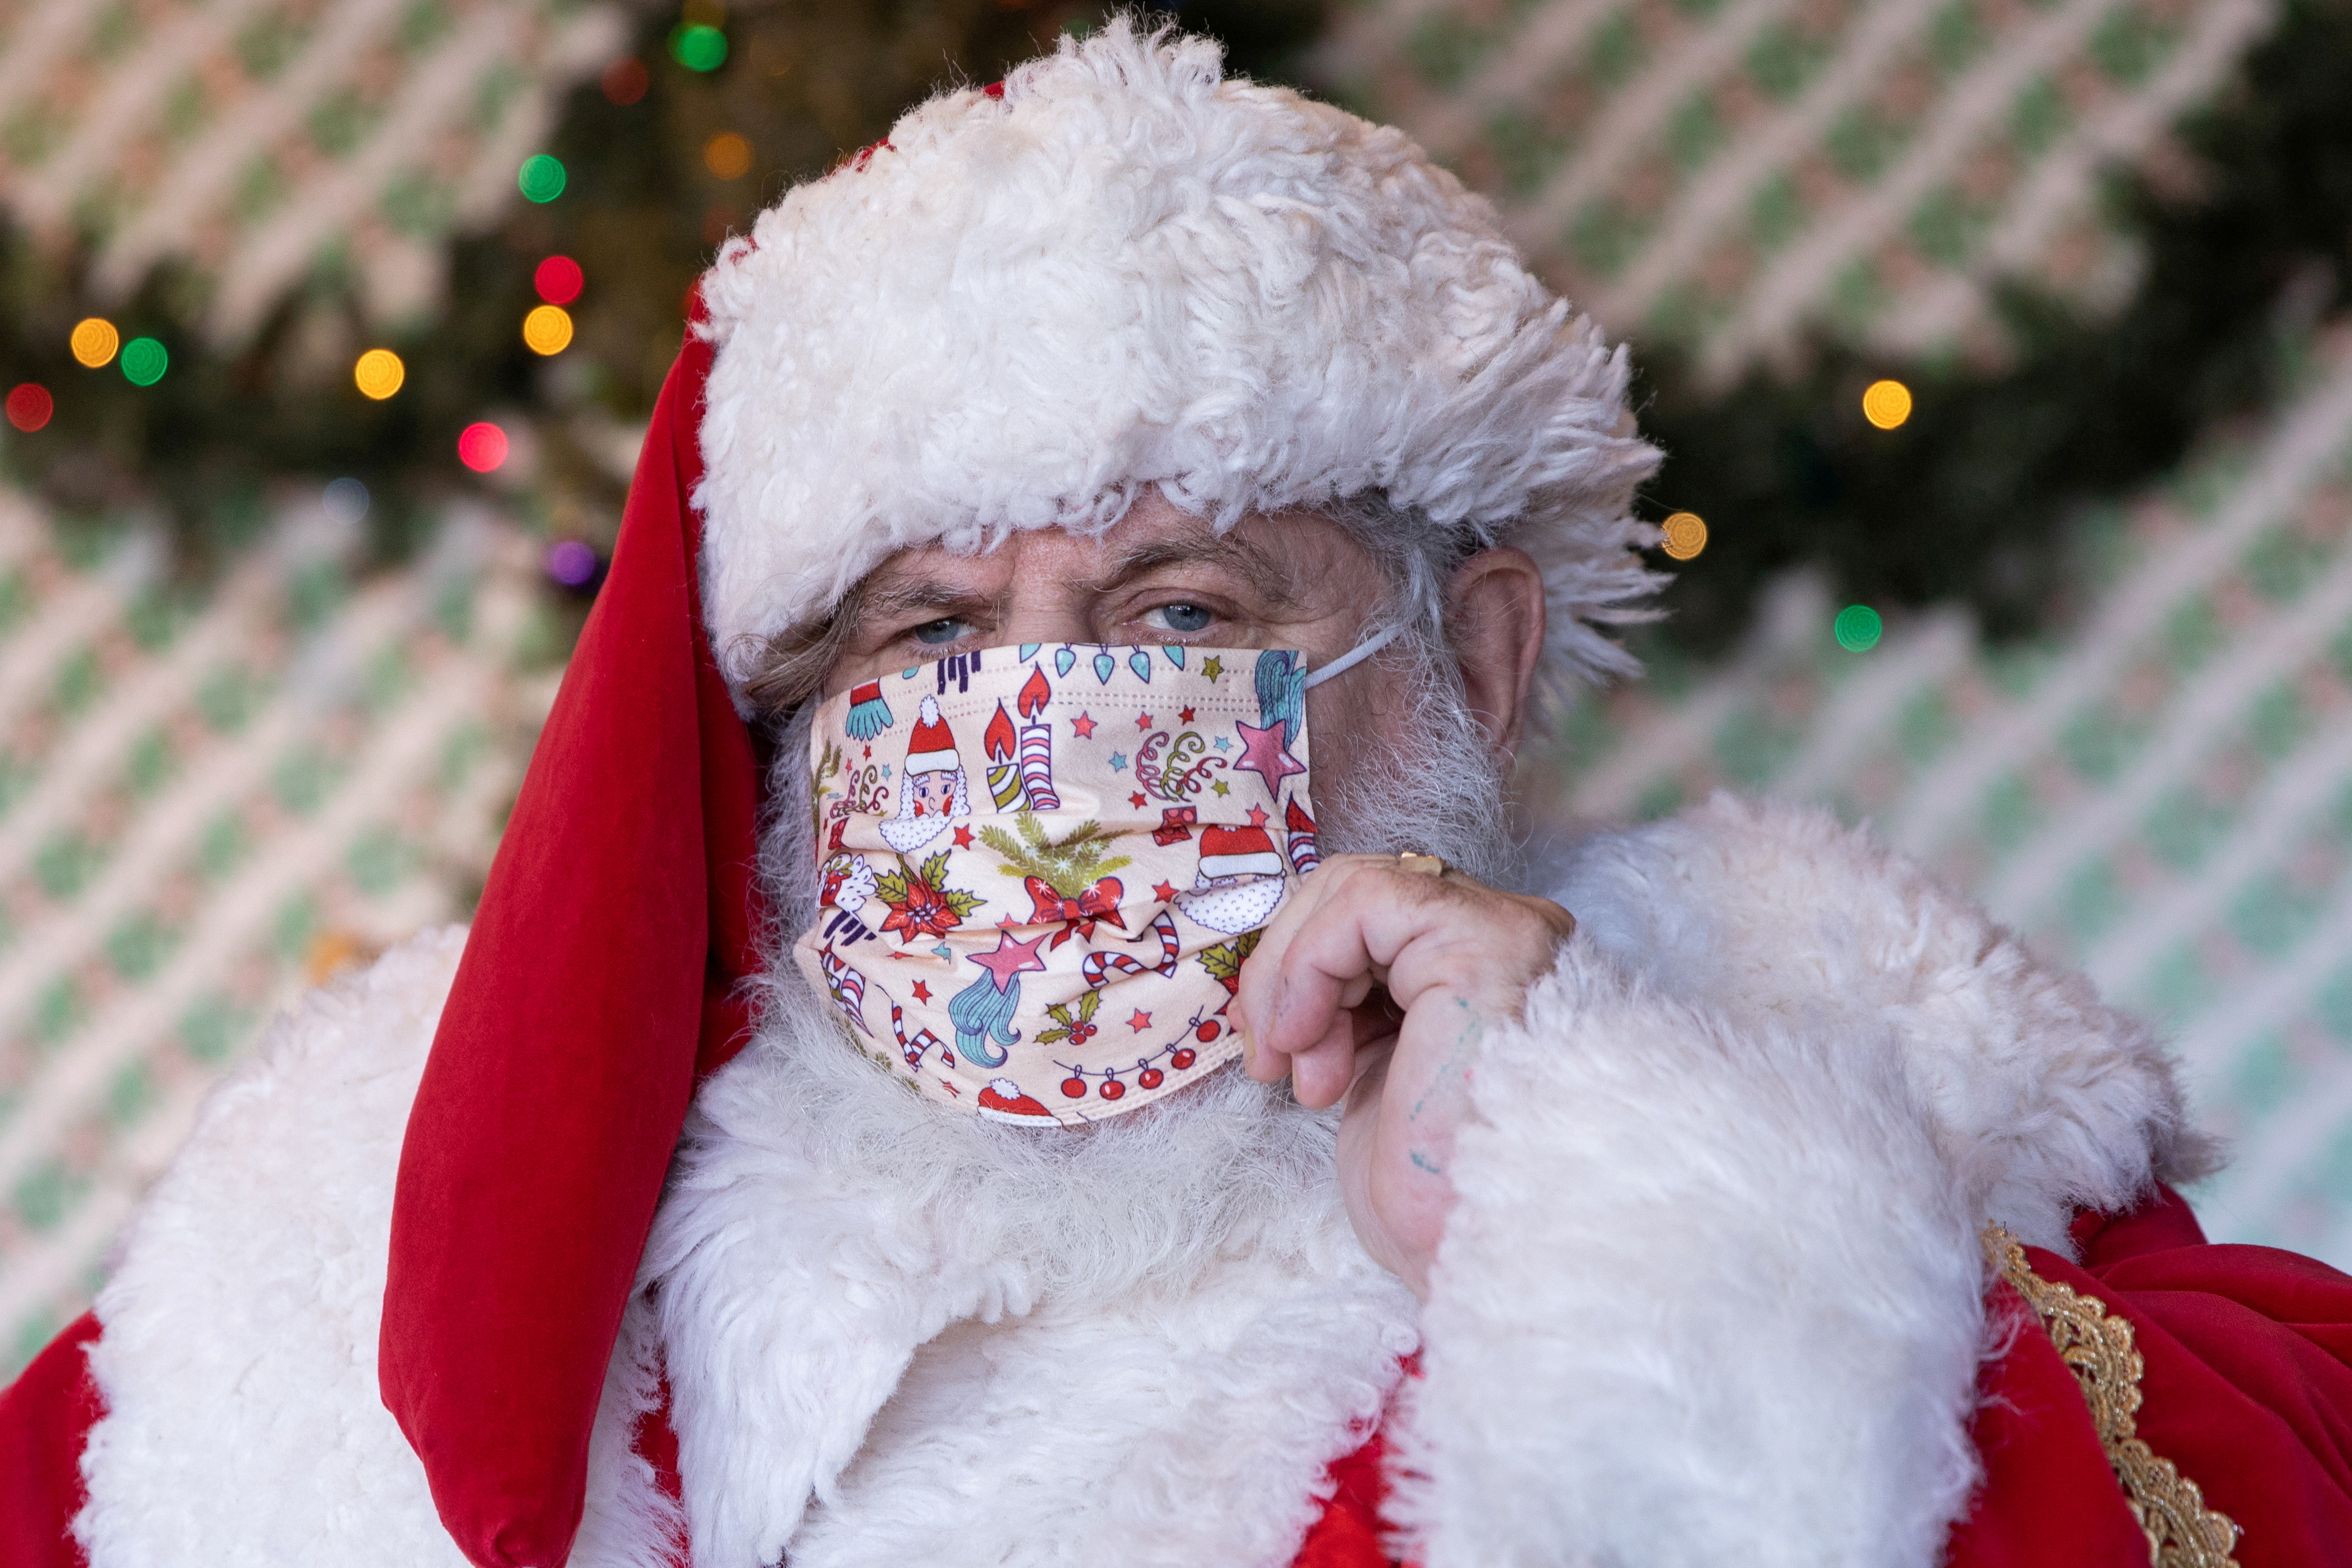 Dana Friedman adjusts his mask before greeting a child at the Bay Terrace Shopping Center in Queens in New York City, U.S., December 6, 2020. REUTERS/Caitlin Ochs/File Photo